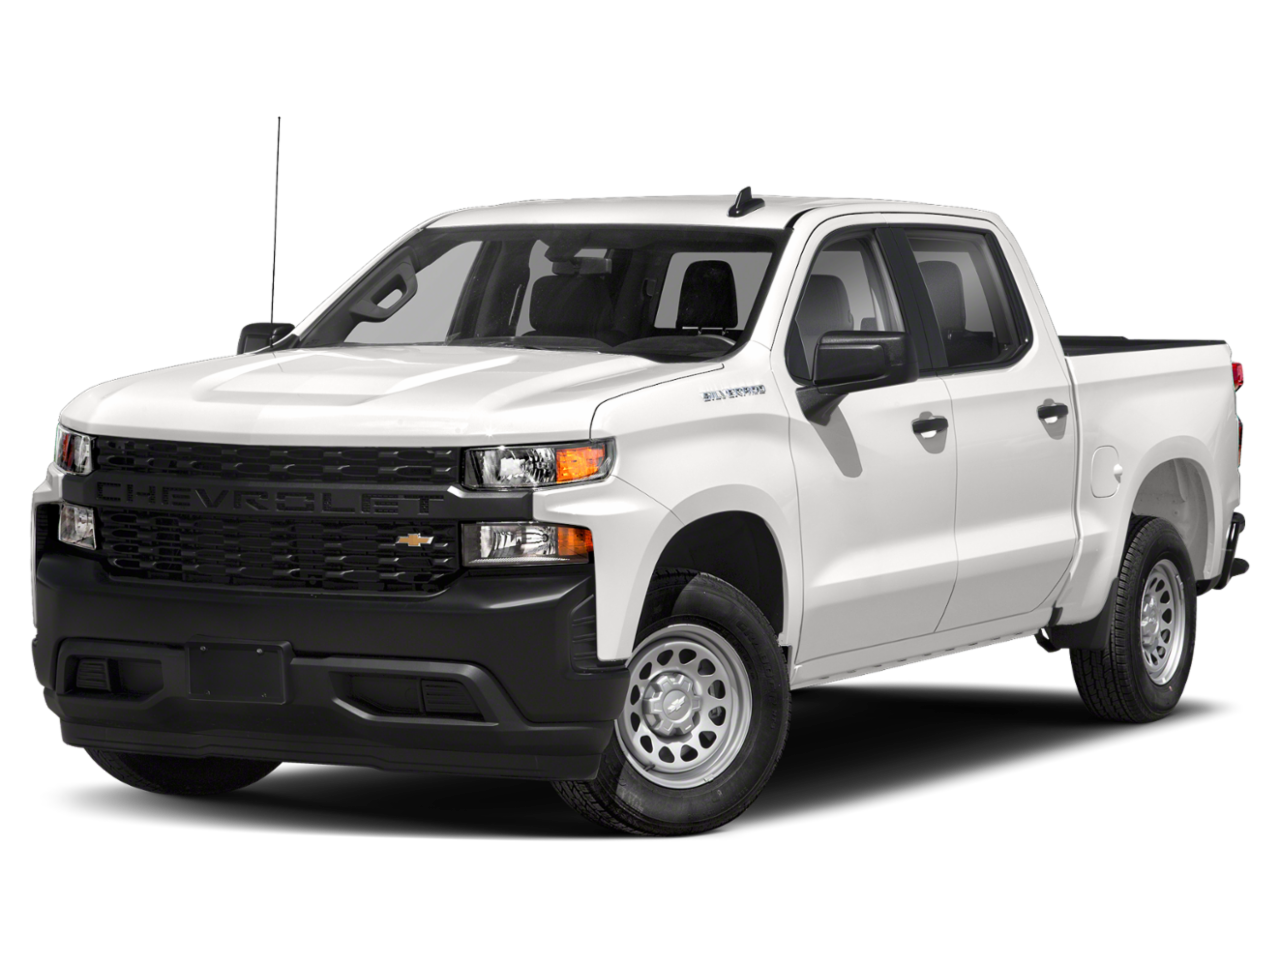 new-chevrolet-silverado1500-from-your-muncie-in-dealership-all